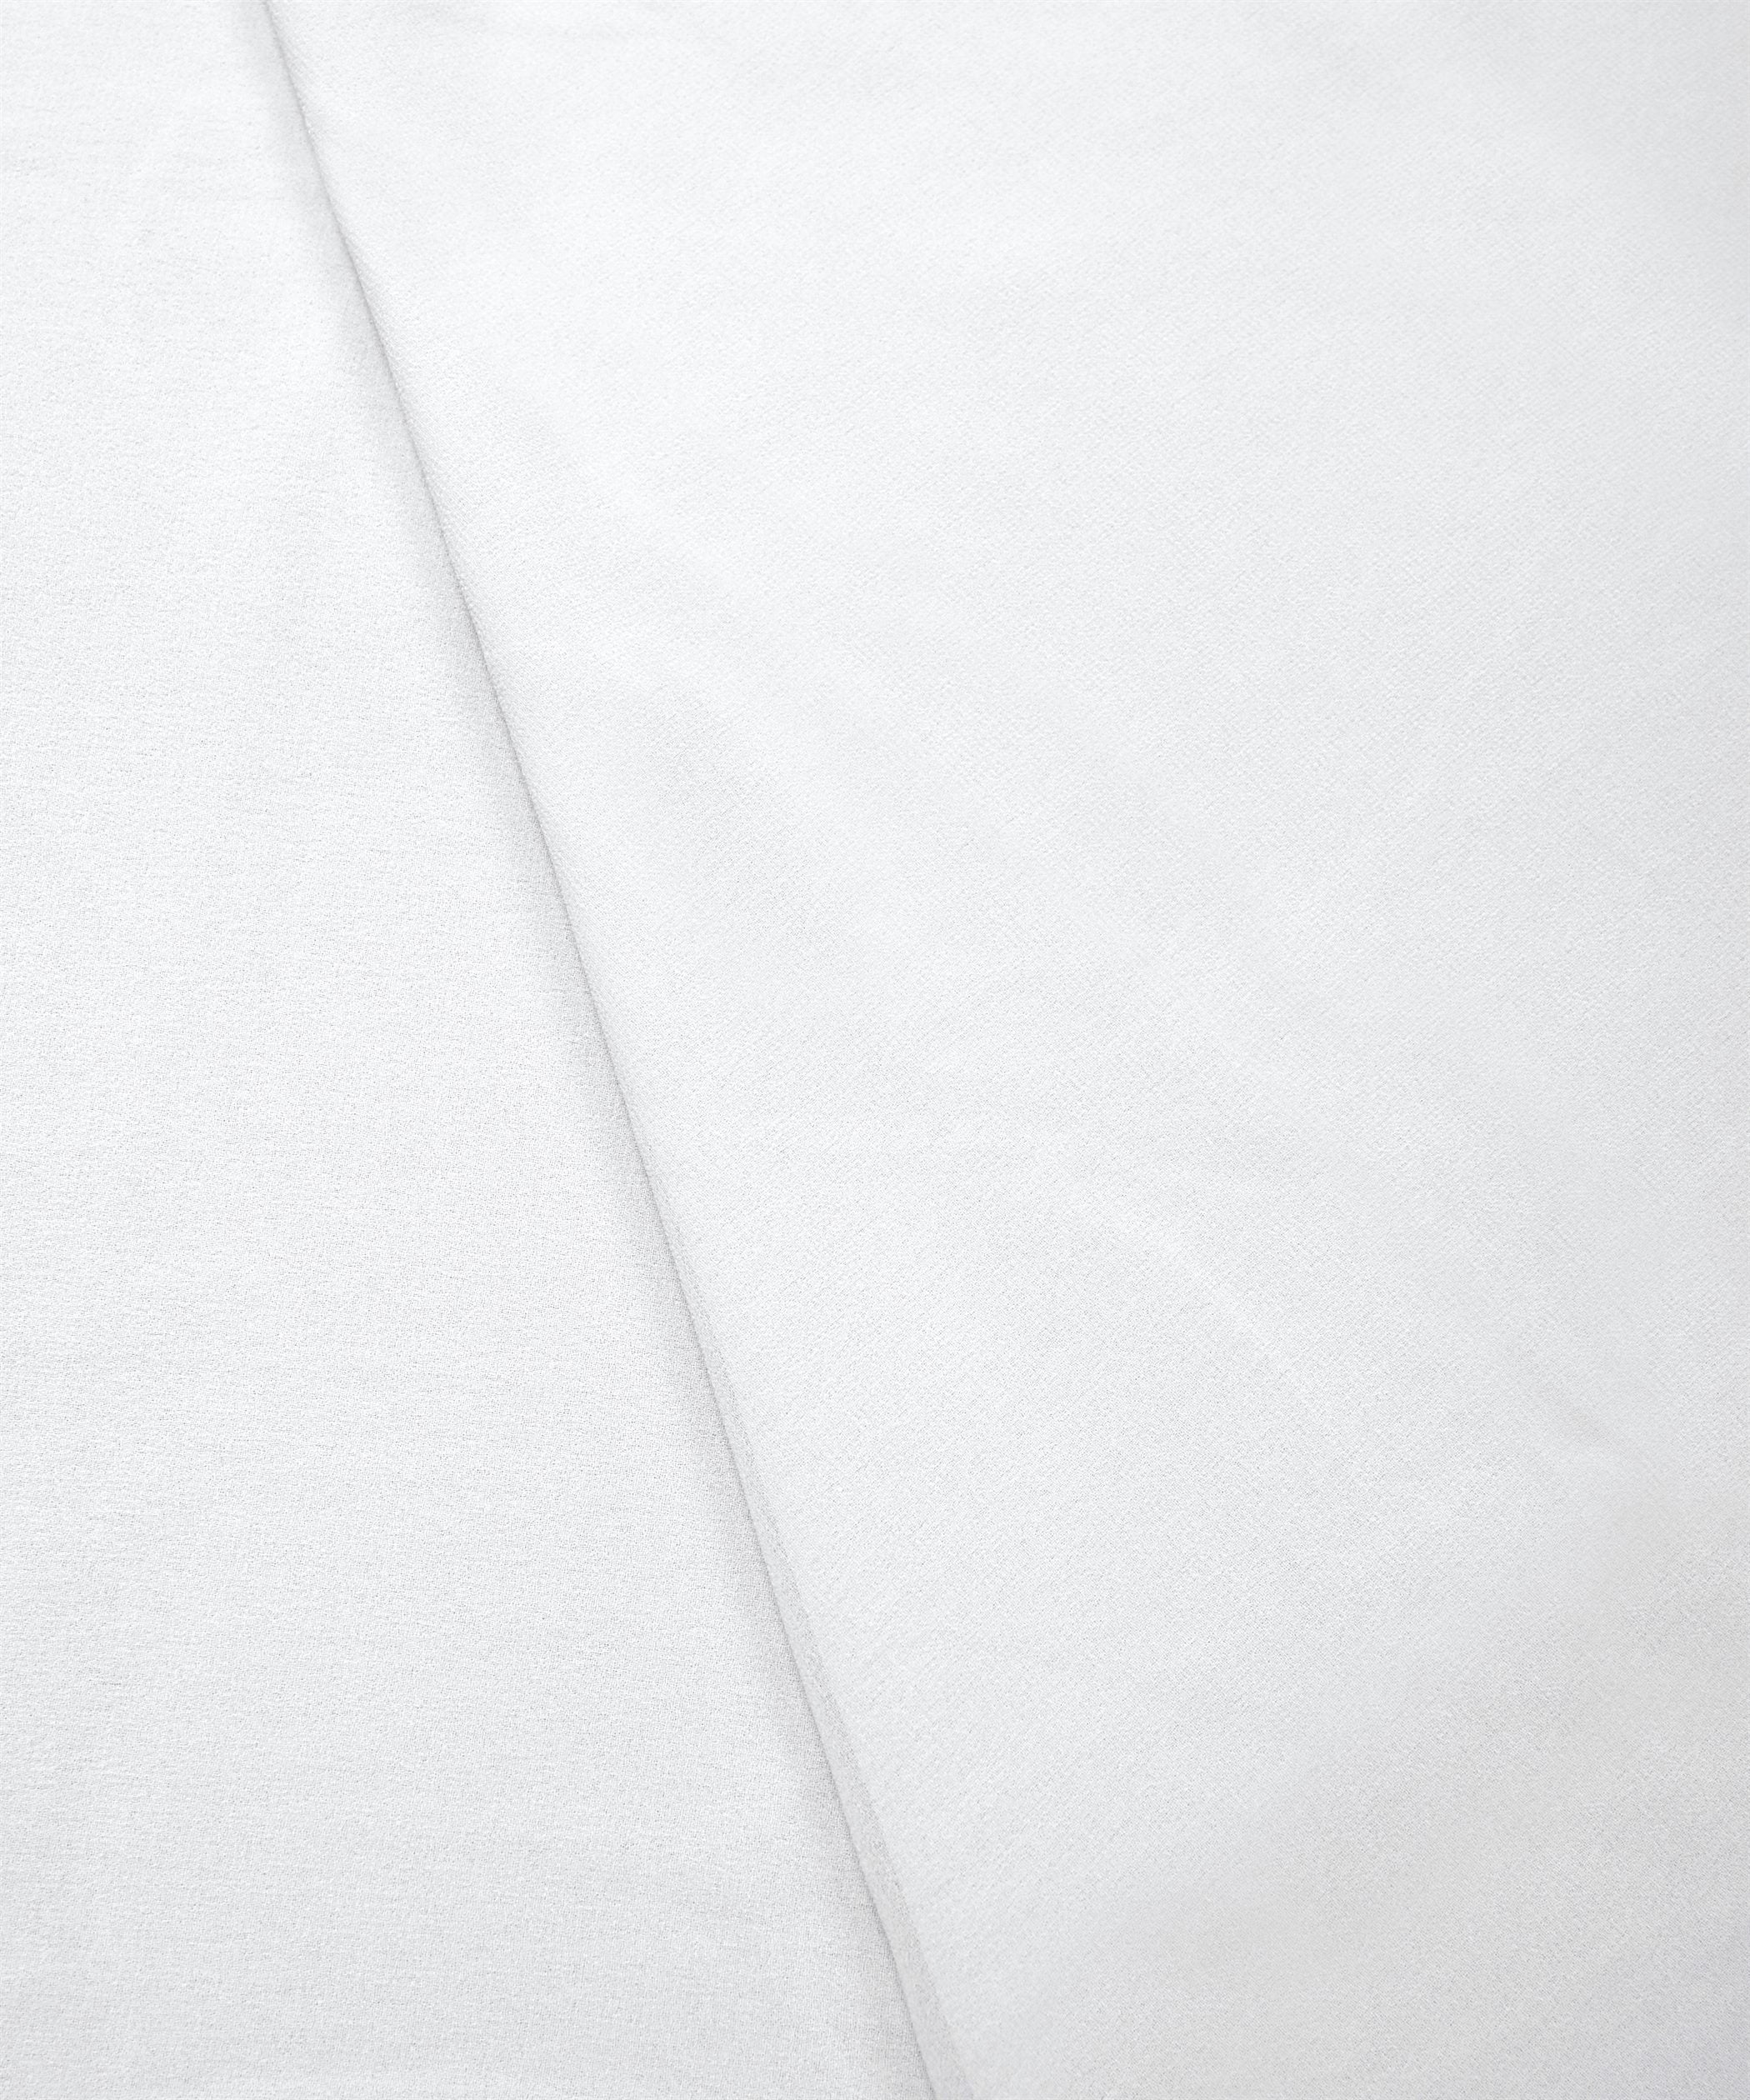 White Plain Dyed Georgette (60 Grams) Fabric